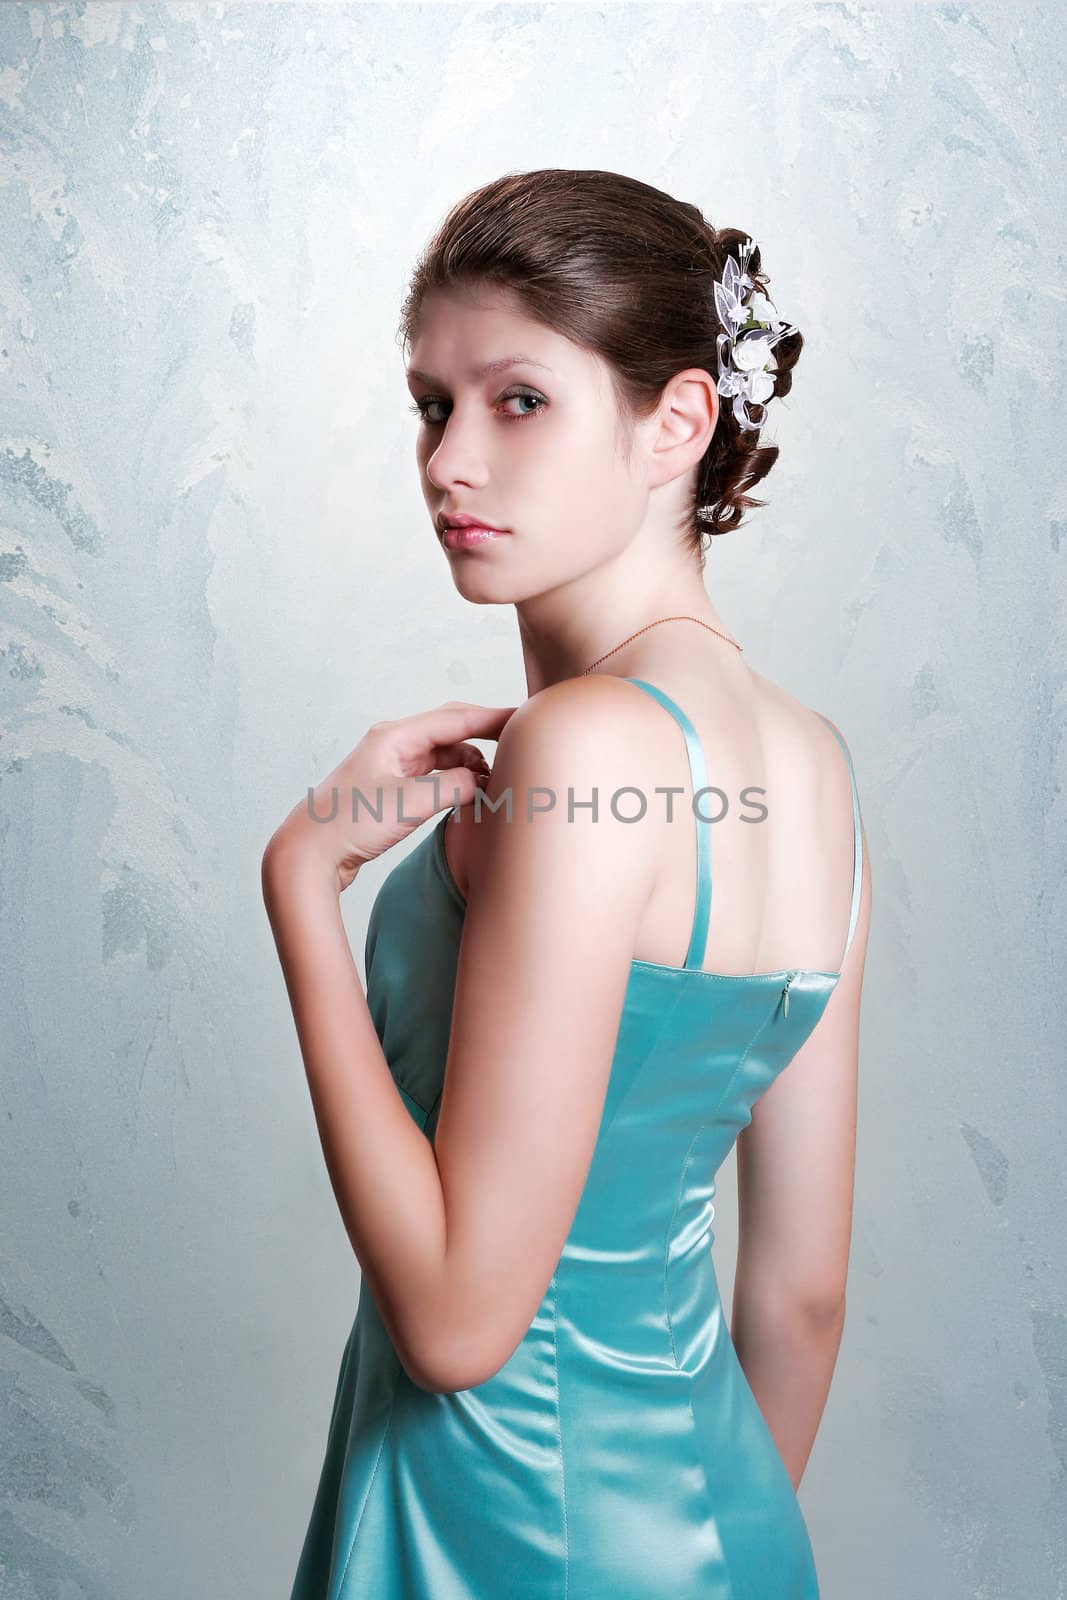 Beautiful girl on cold background